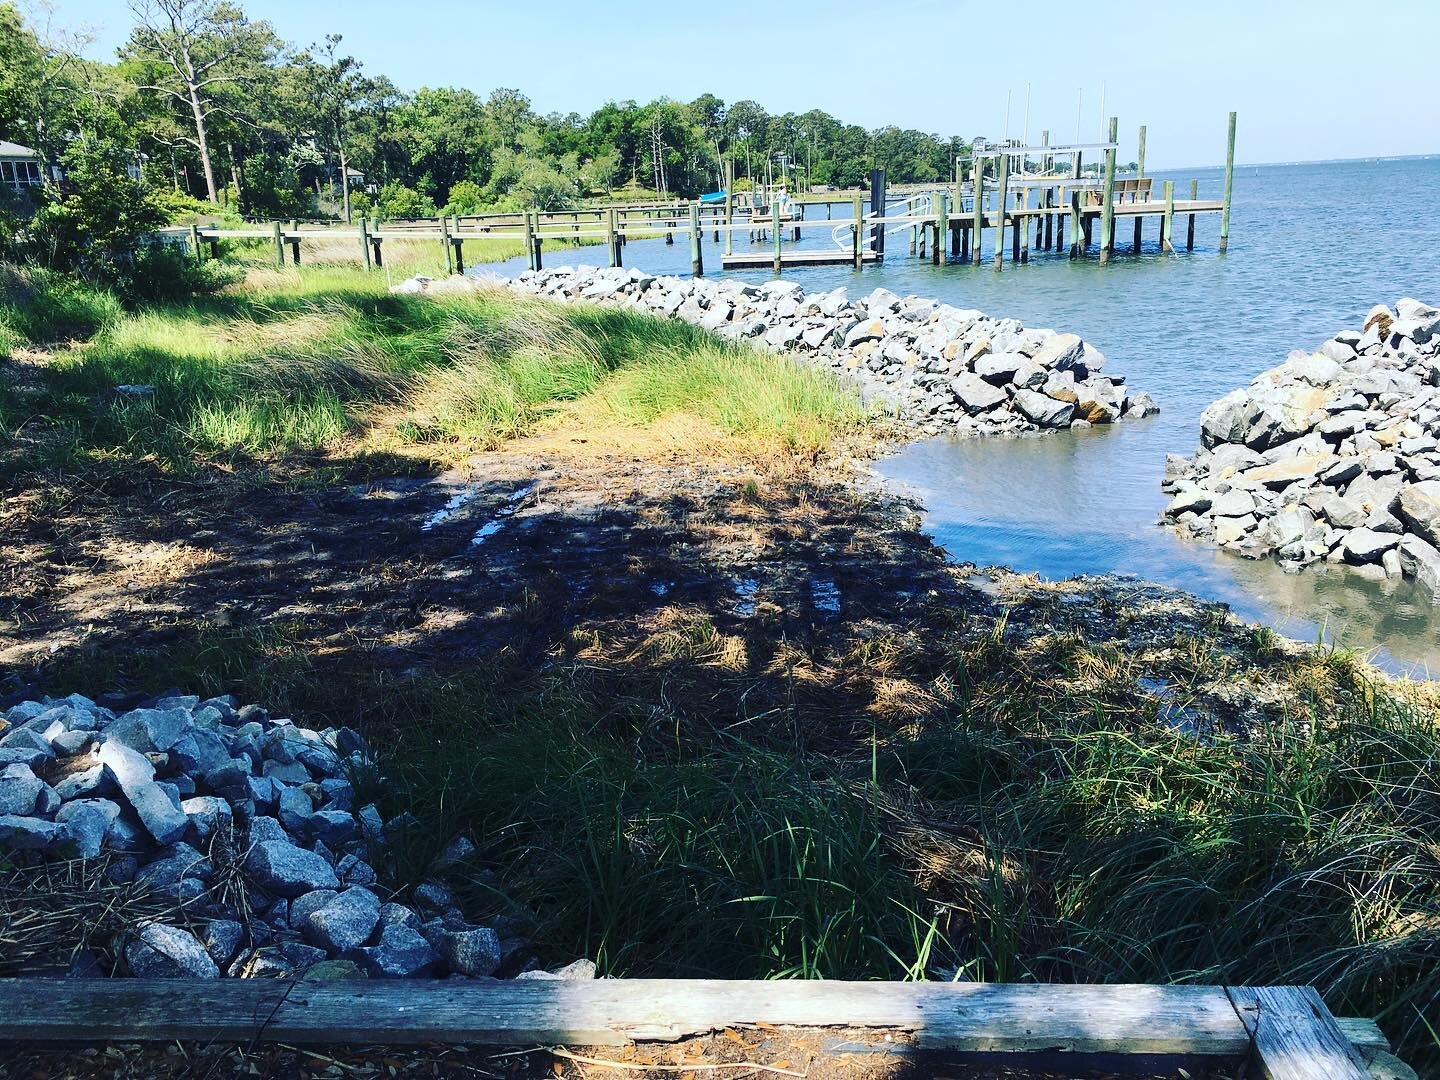 📸 LIVING SHORELINE🌊🏞️
Did you know that North Carolina offers grant funds for the creation of stunning Granite Sill Living Shorelines? 😍 Let's dive into this amazing opportunity!

North Carolina's granite sill living shorelines are not only an in